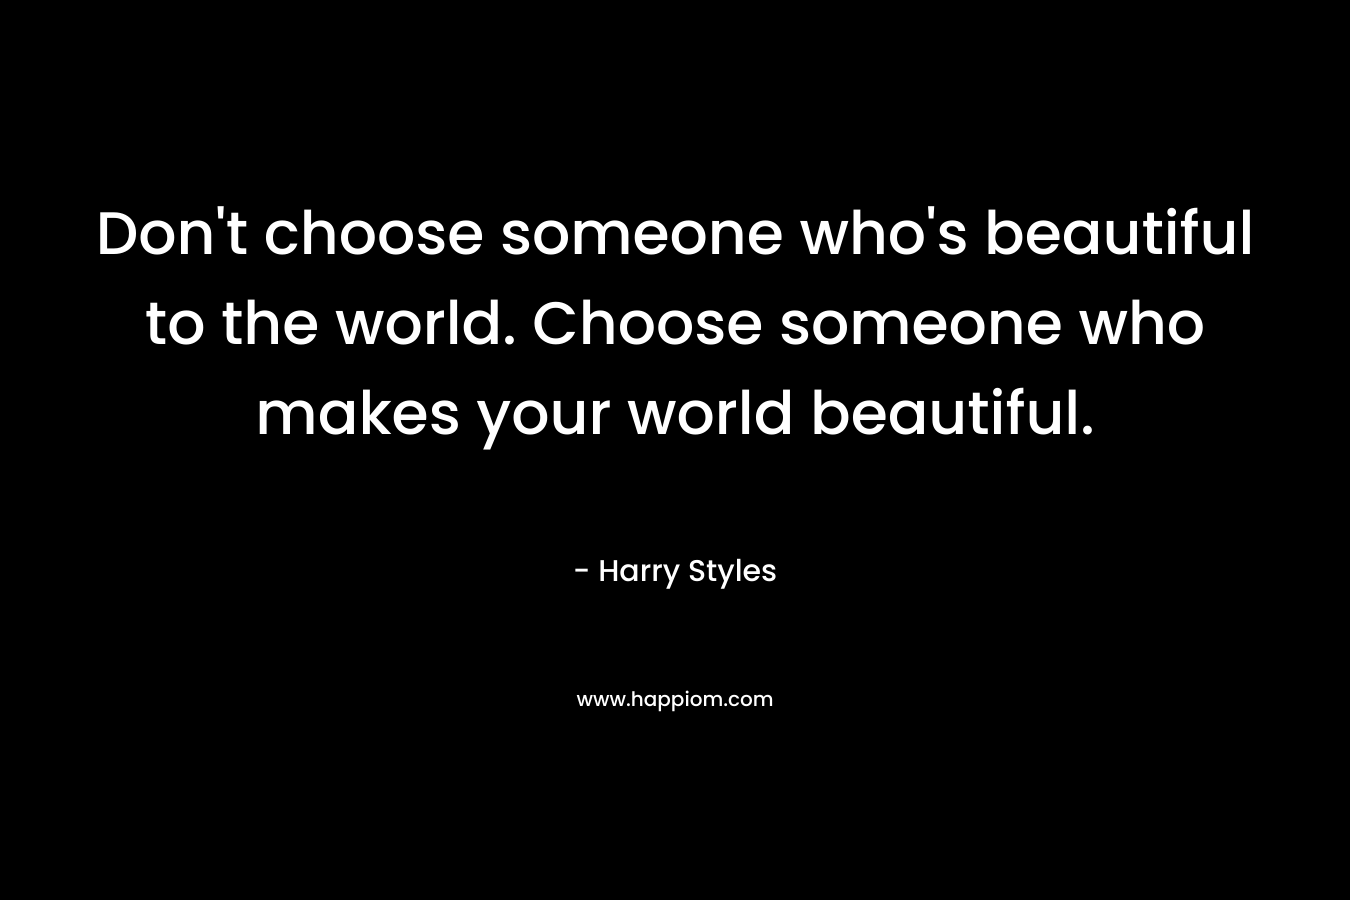 Don't choose someone who's beautiful to the world. Choose someone who makes your world beautiful.